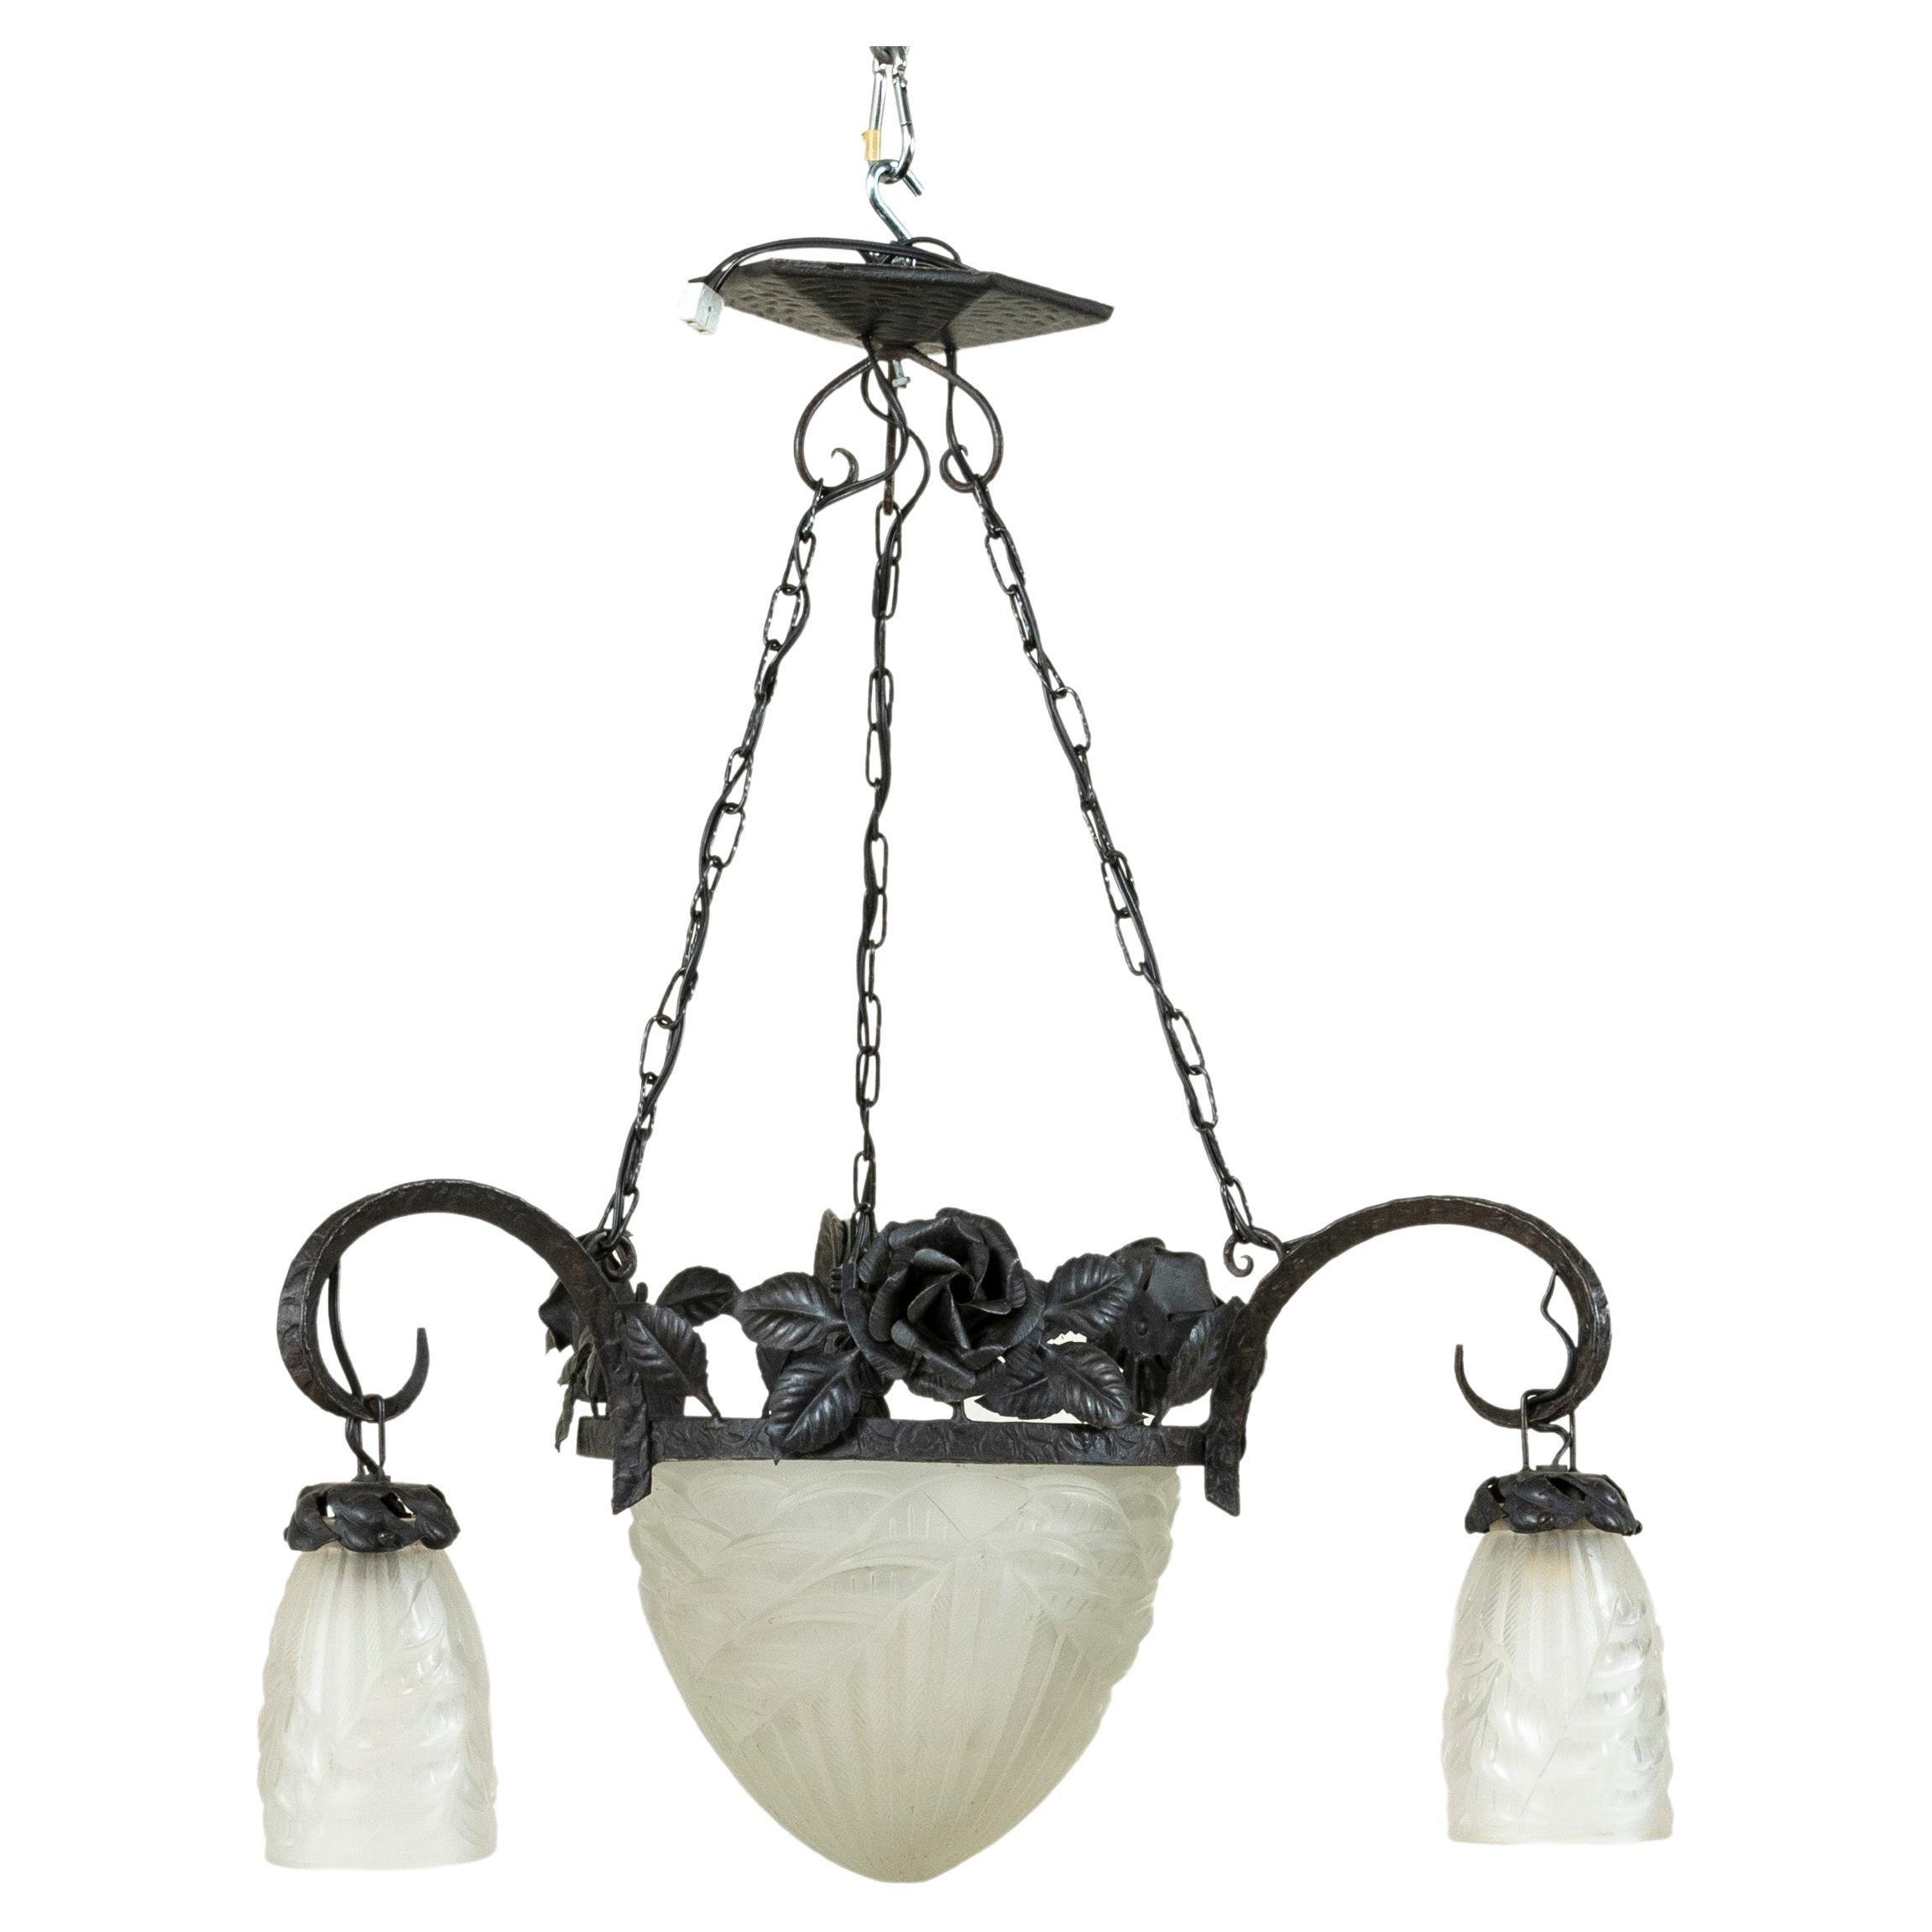 Early 20th Century French Art Deco Period Iron and Glass Chandelier, Four Lights For Sale